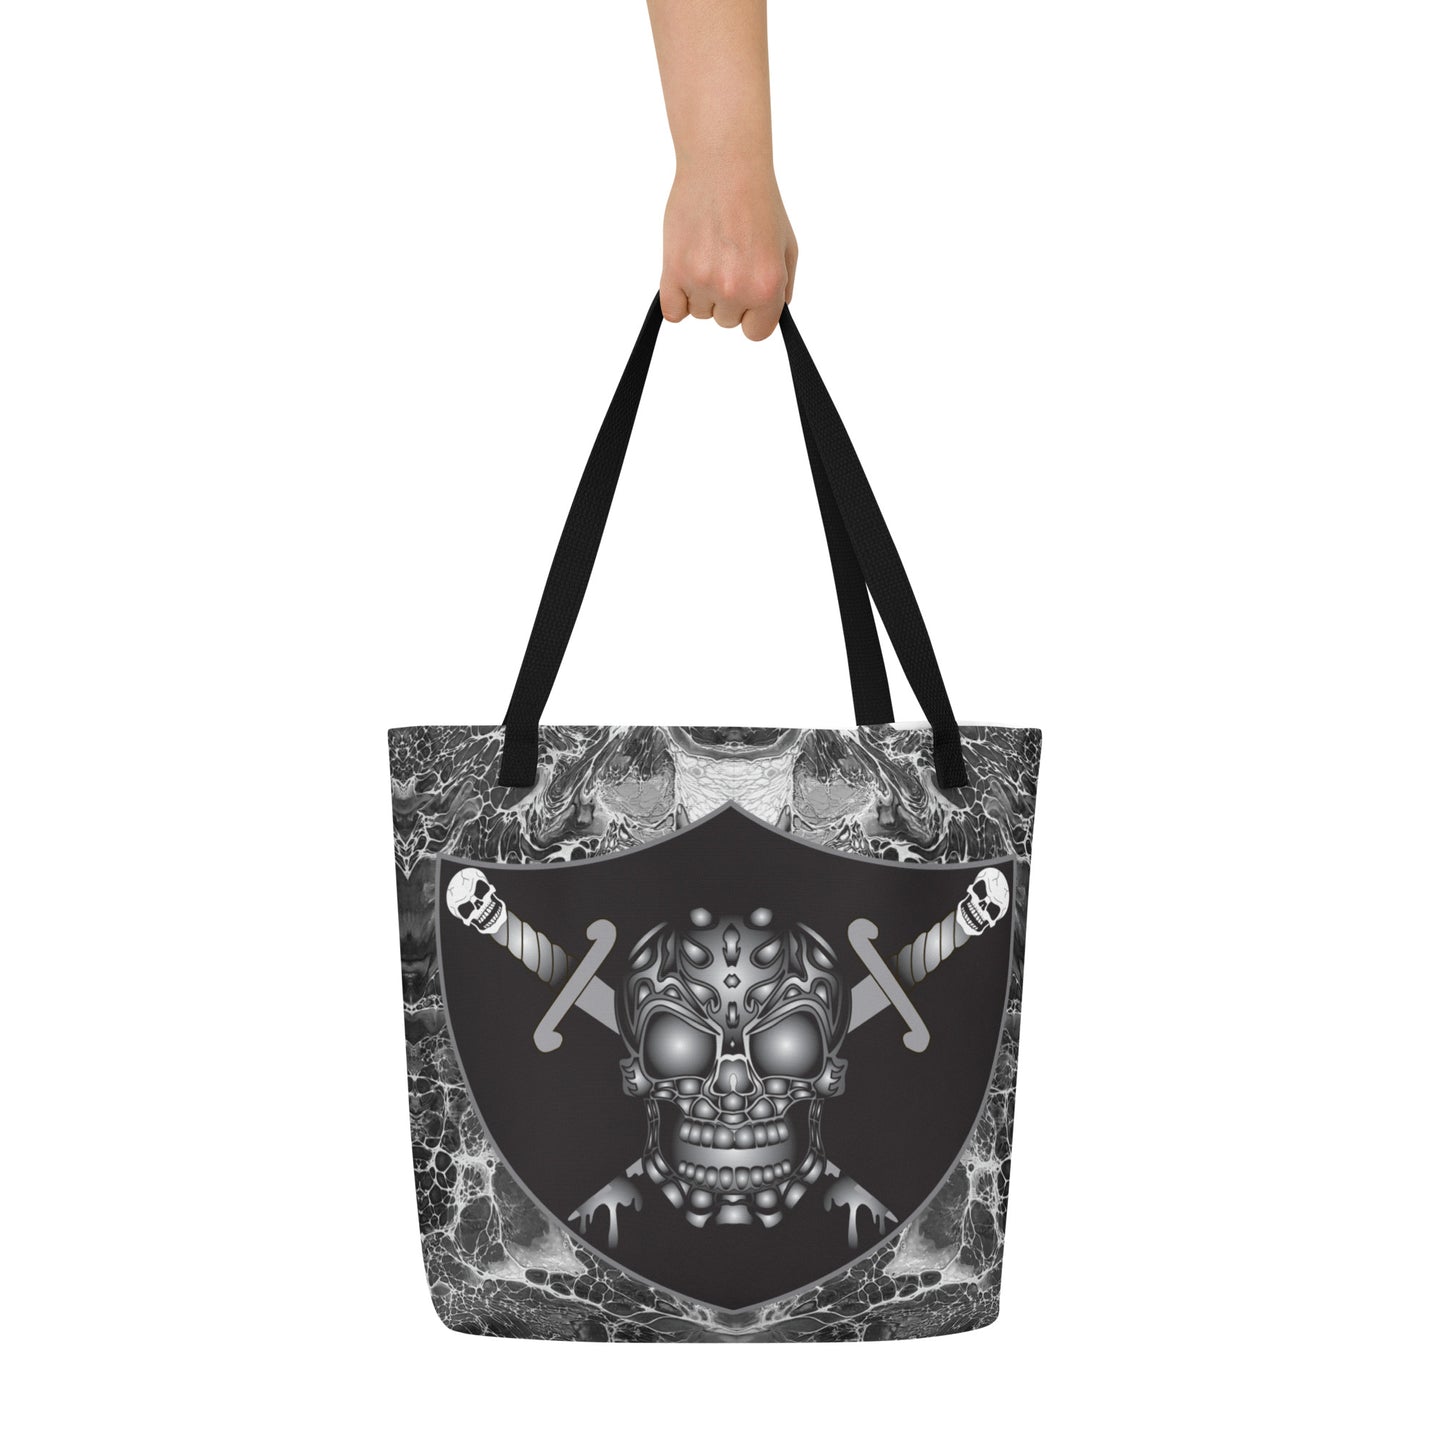 All-Over Print Large Tote Bag - SW-002